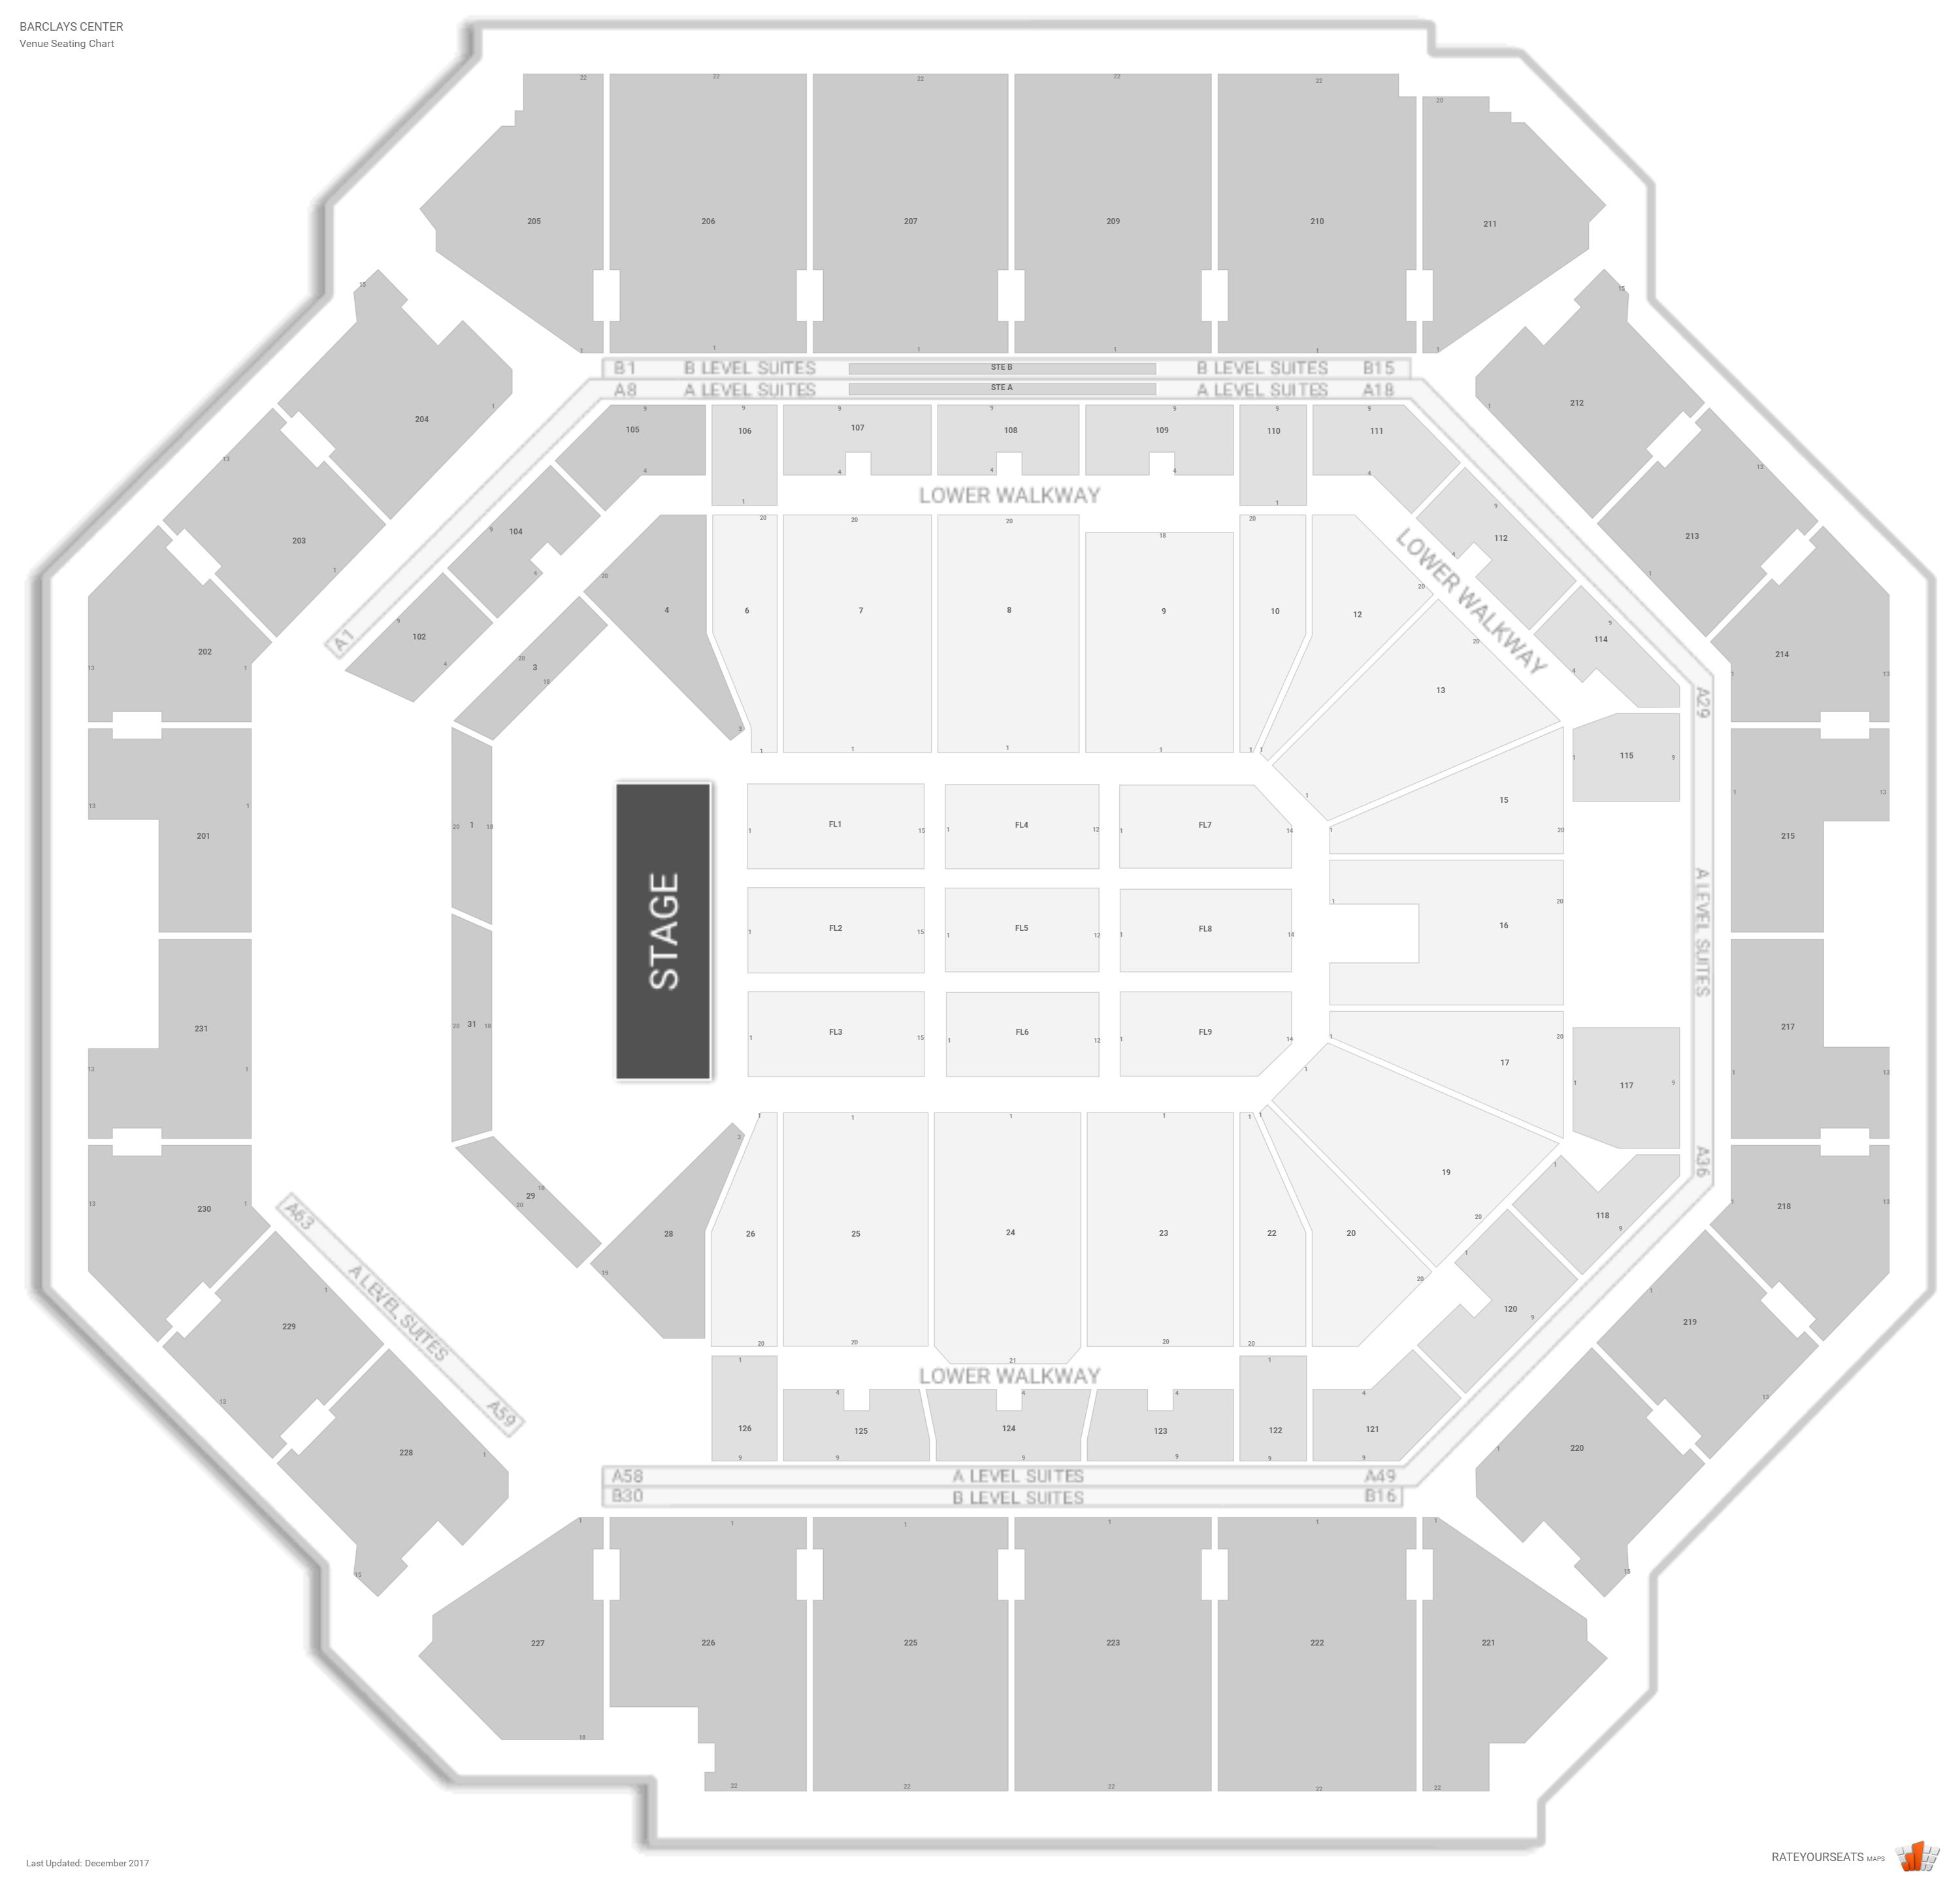 Barclays Center New York Seating Chart